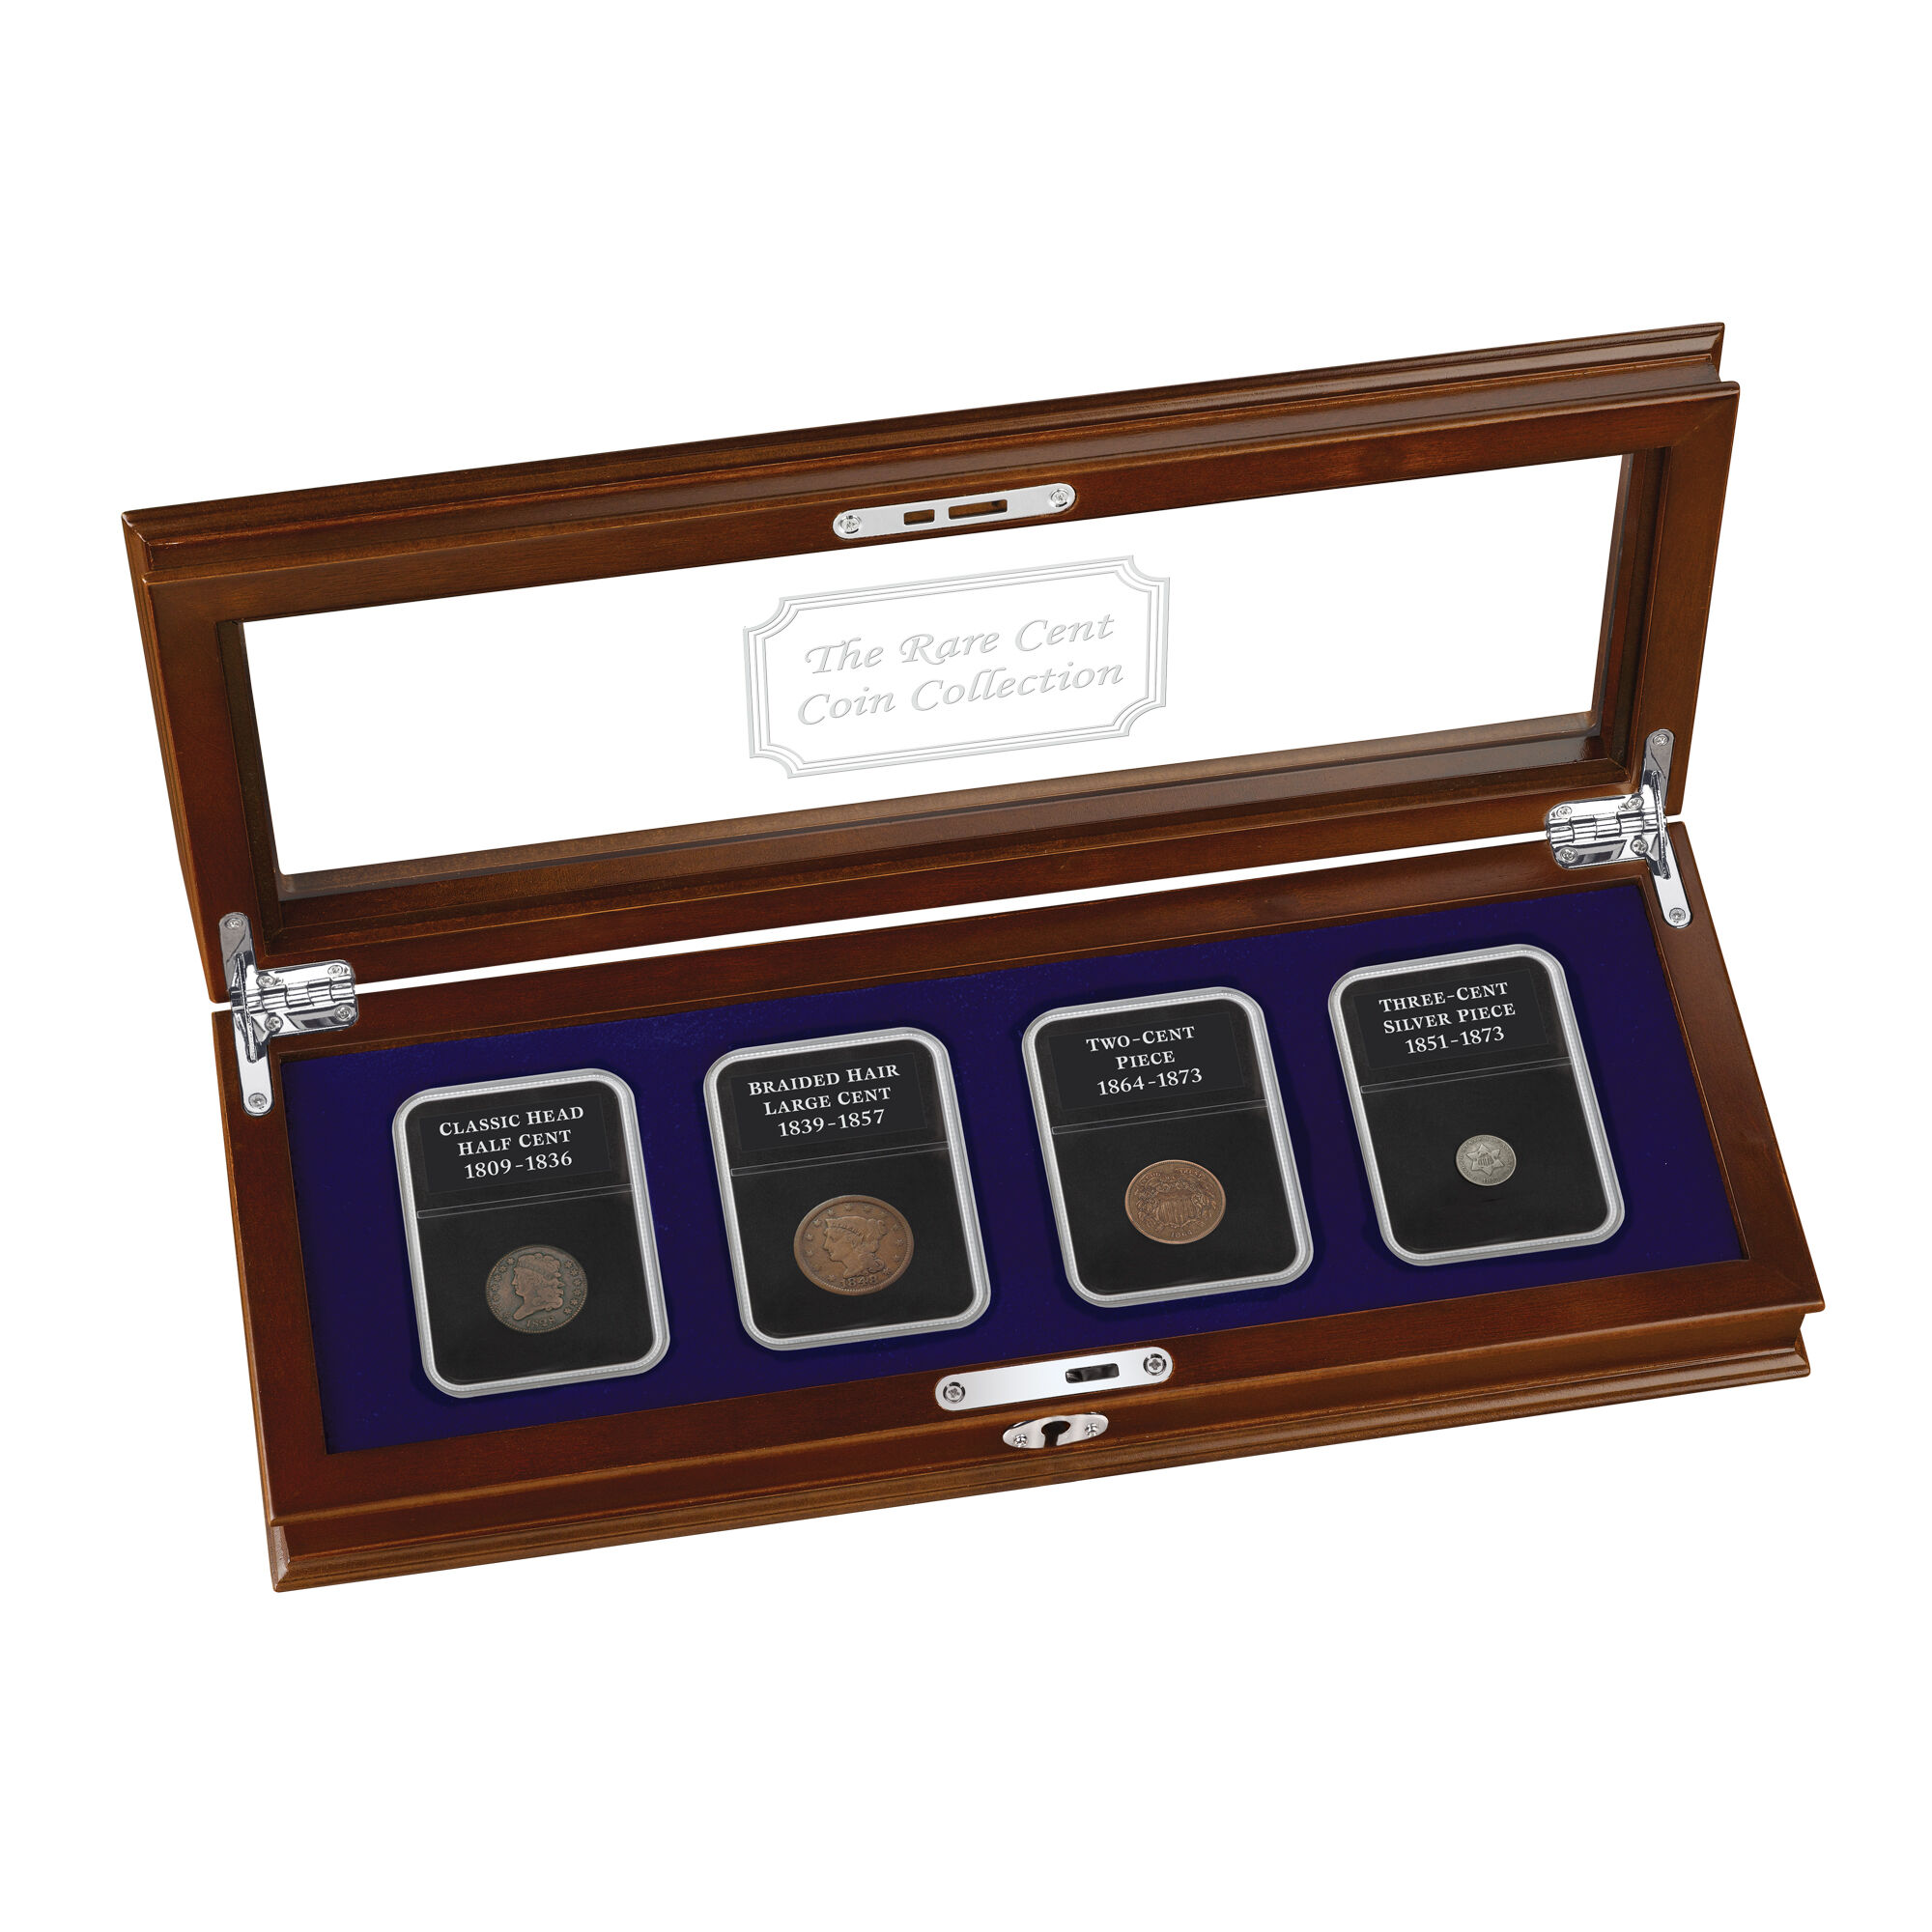 The Rare Cent Coin Collection 5218 0056 a display